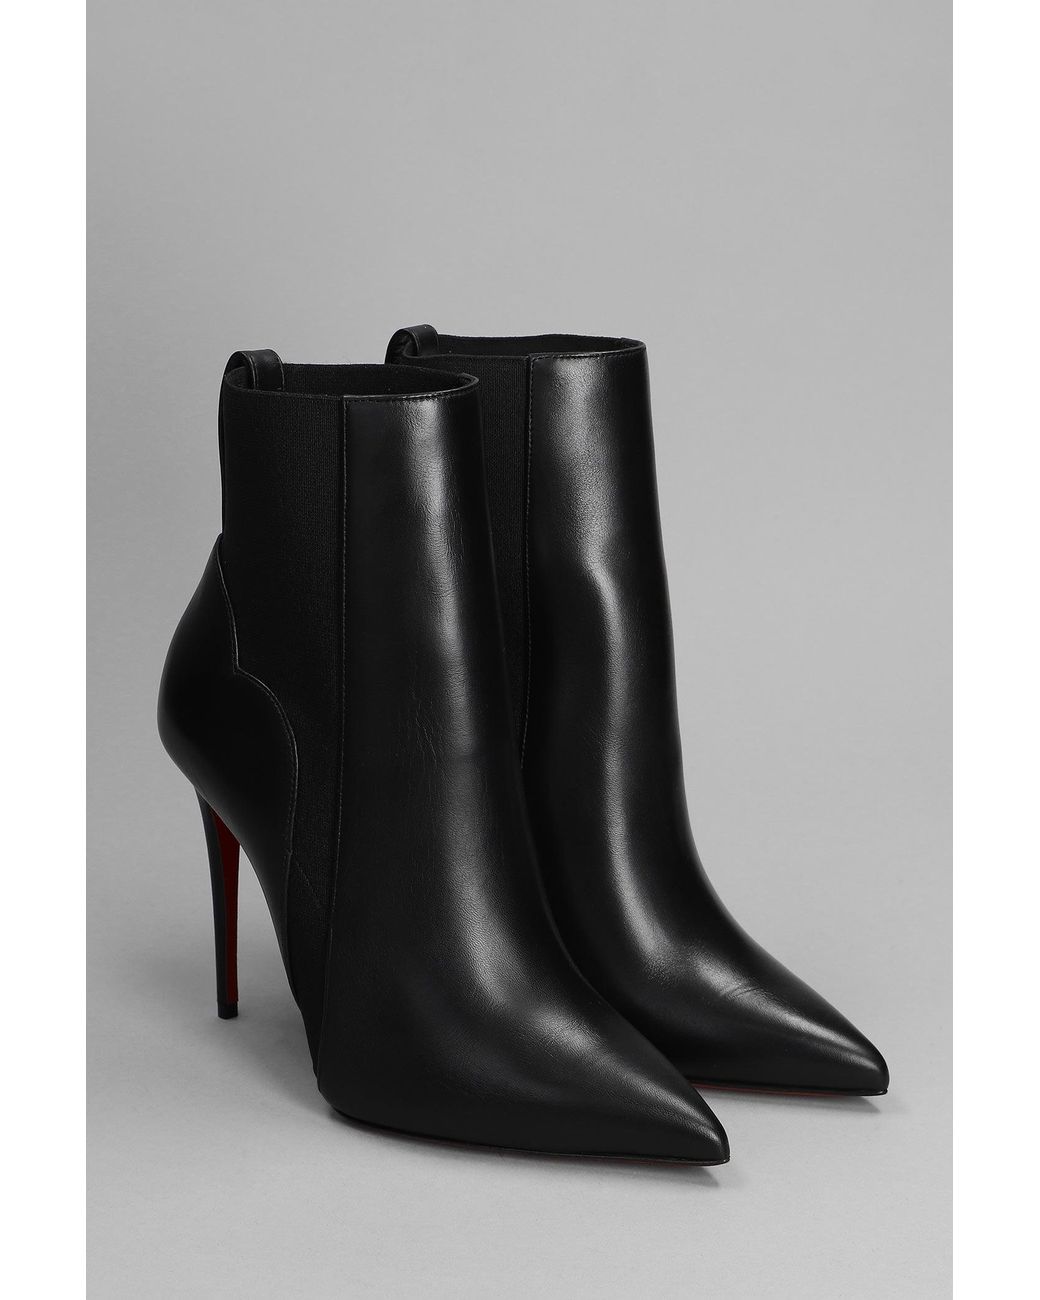 Christian Louboutin Chelsea Chick Booty High Heels Ankle Boots In Leather  in Black | Lyst